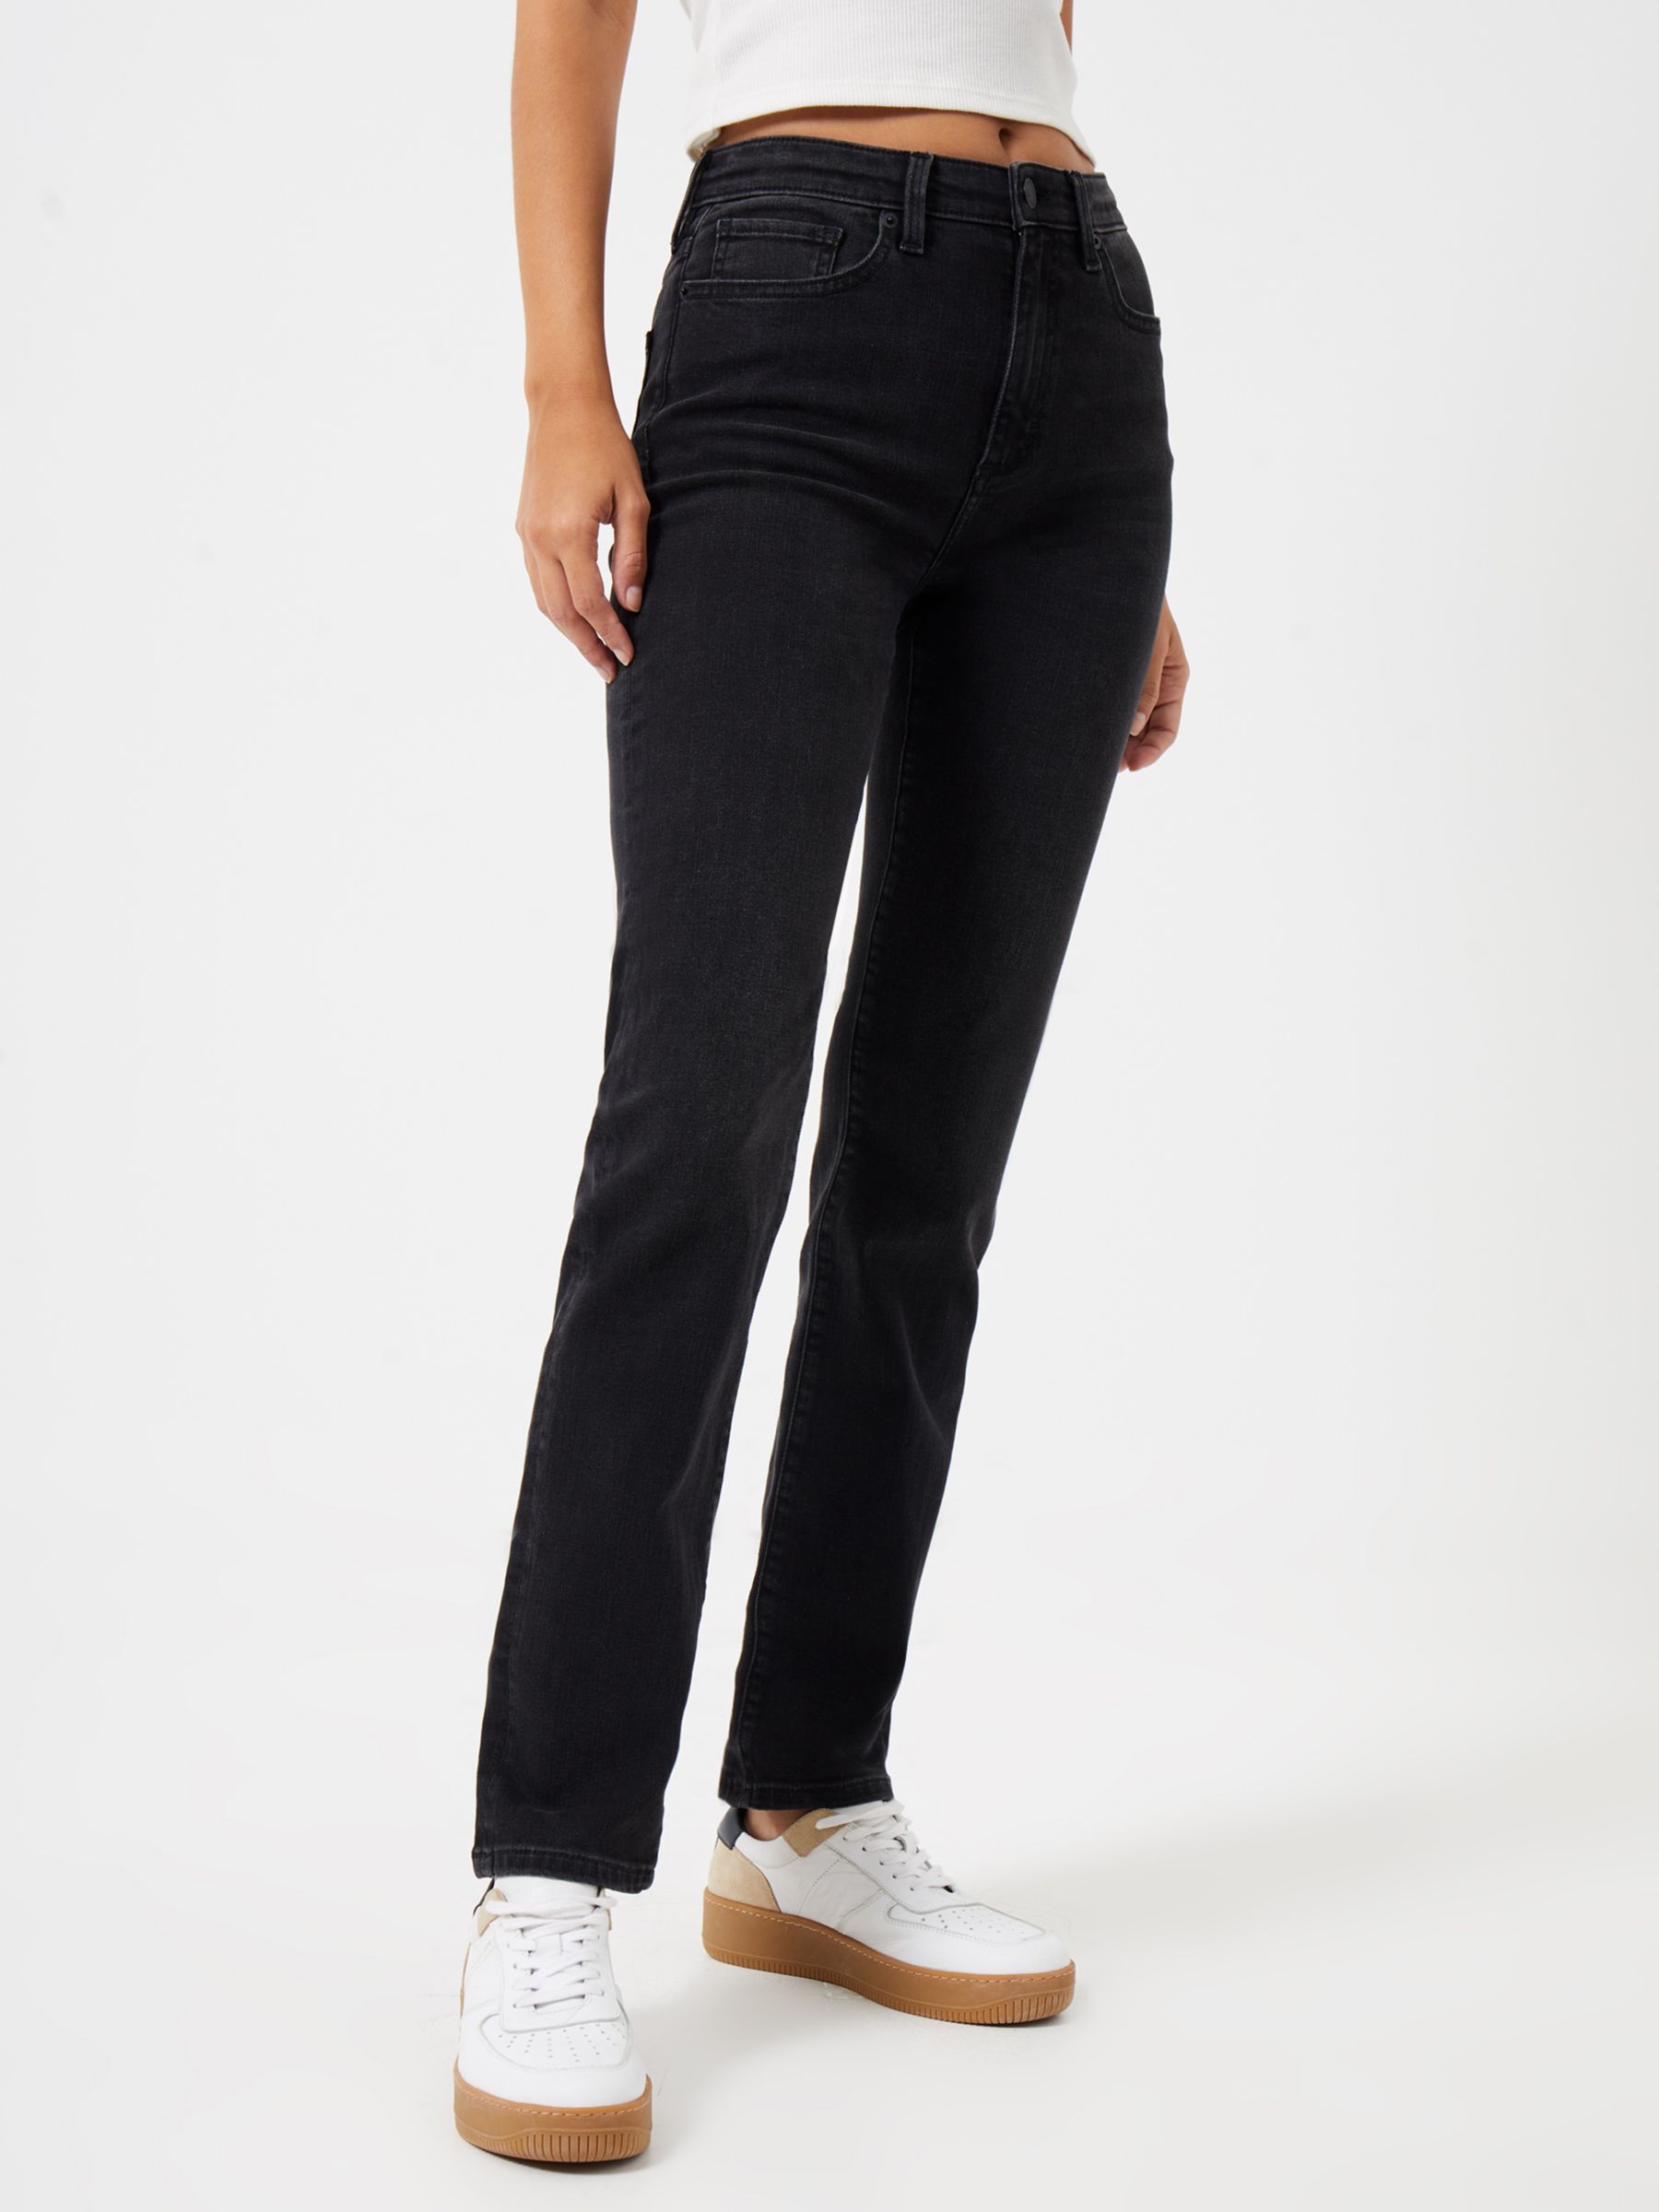 French Connection Stretch Slim Jeans, Black, Black, 8